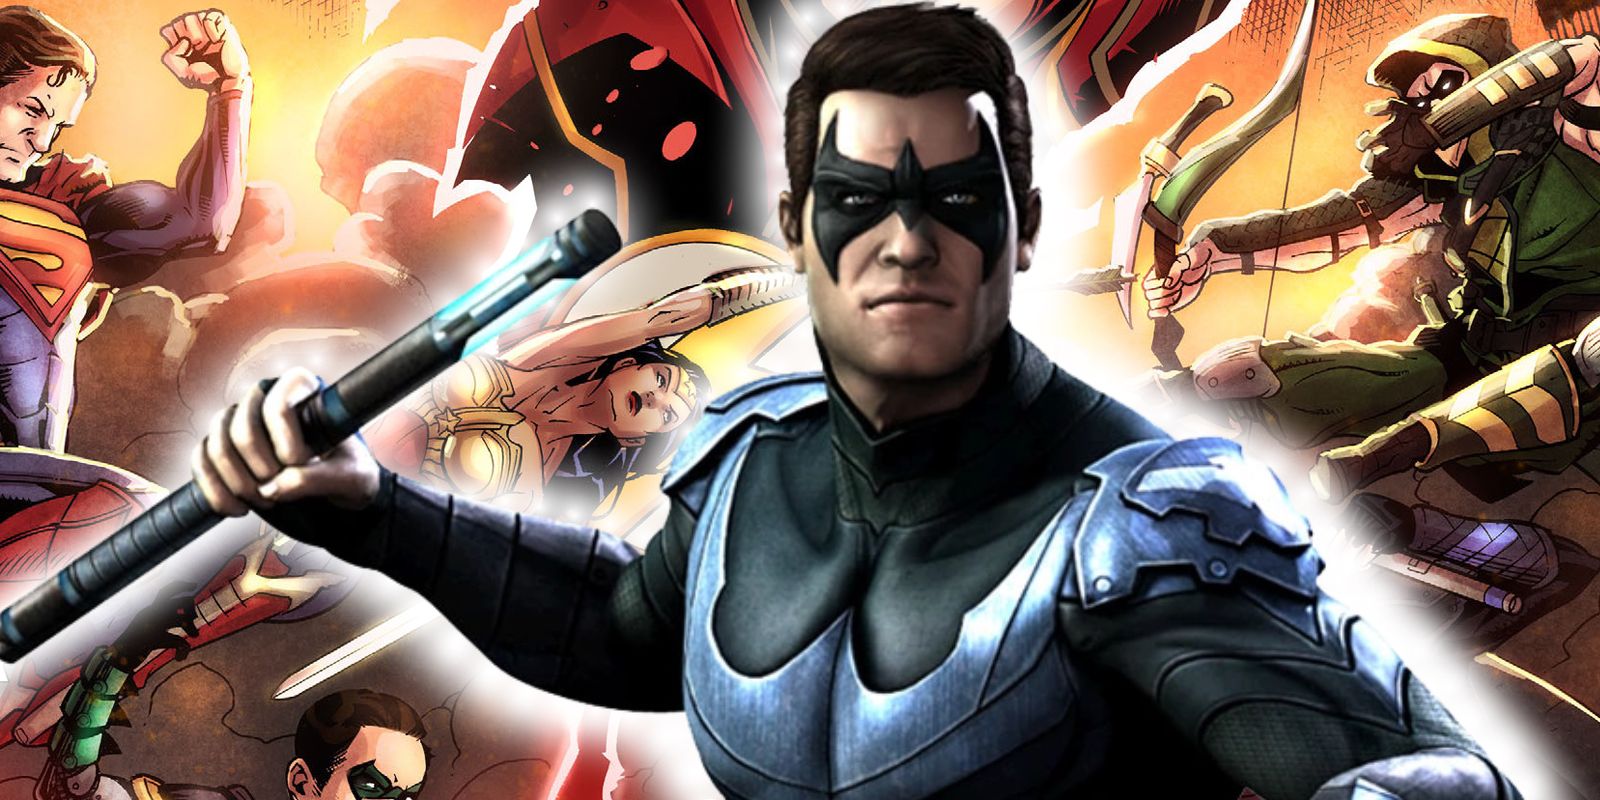 The Death of Nightwing is Still One of DCs Most Controversial